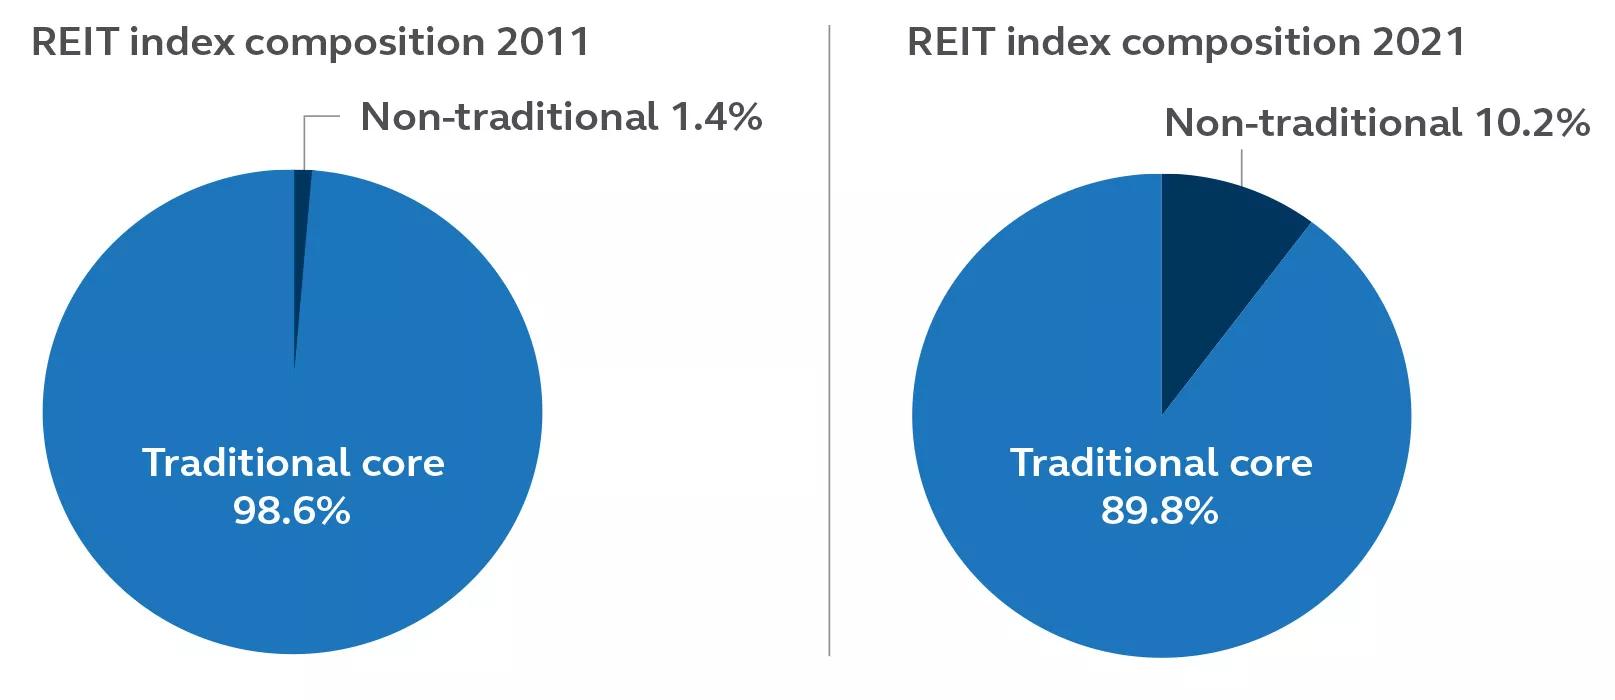 Two pie charts showing REITs index composition in 2011 and 2021 to display growth of non-traditional property types in Europe.